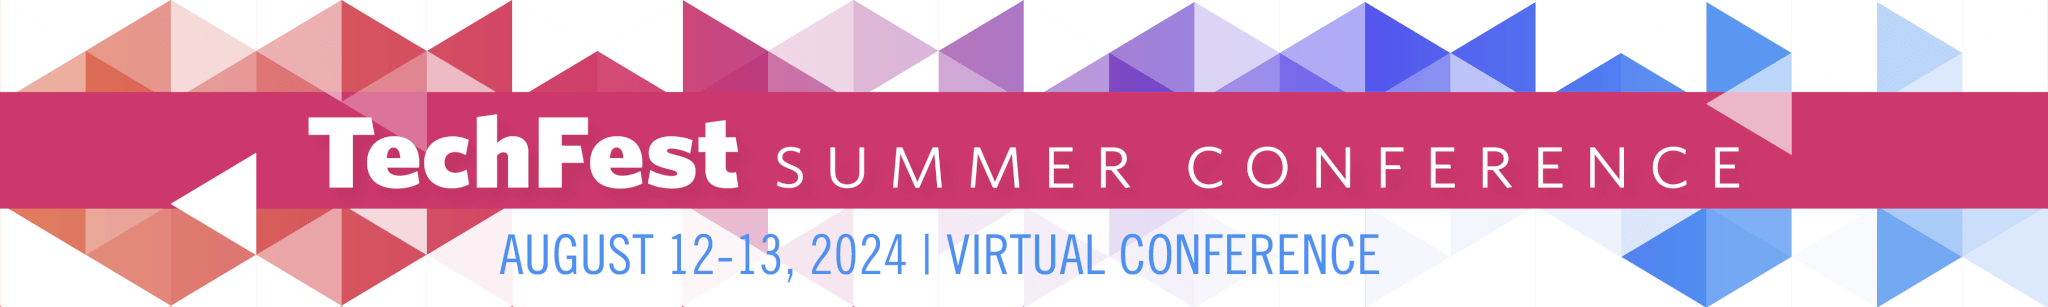 TechFest Summer Conference Header Graphic